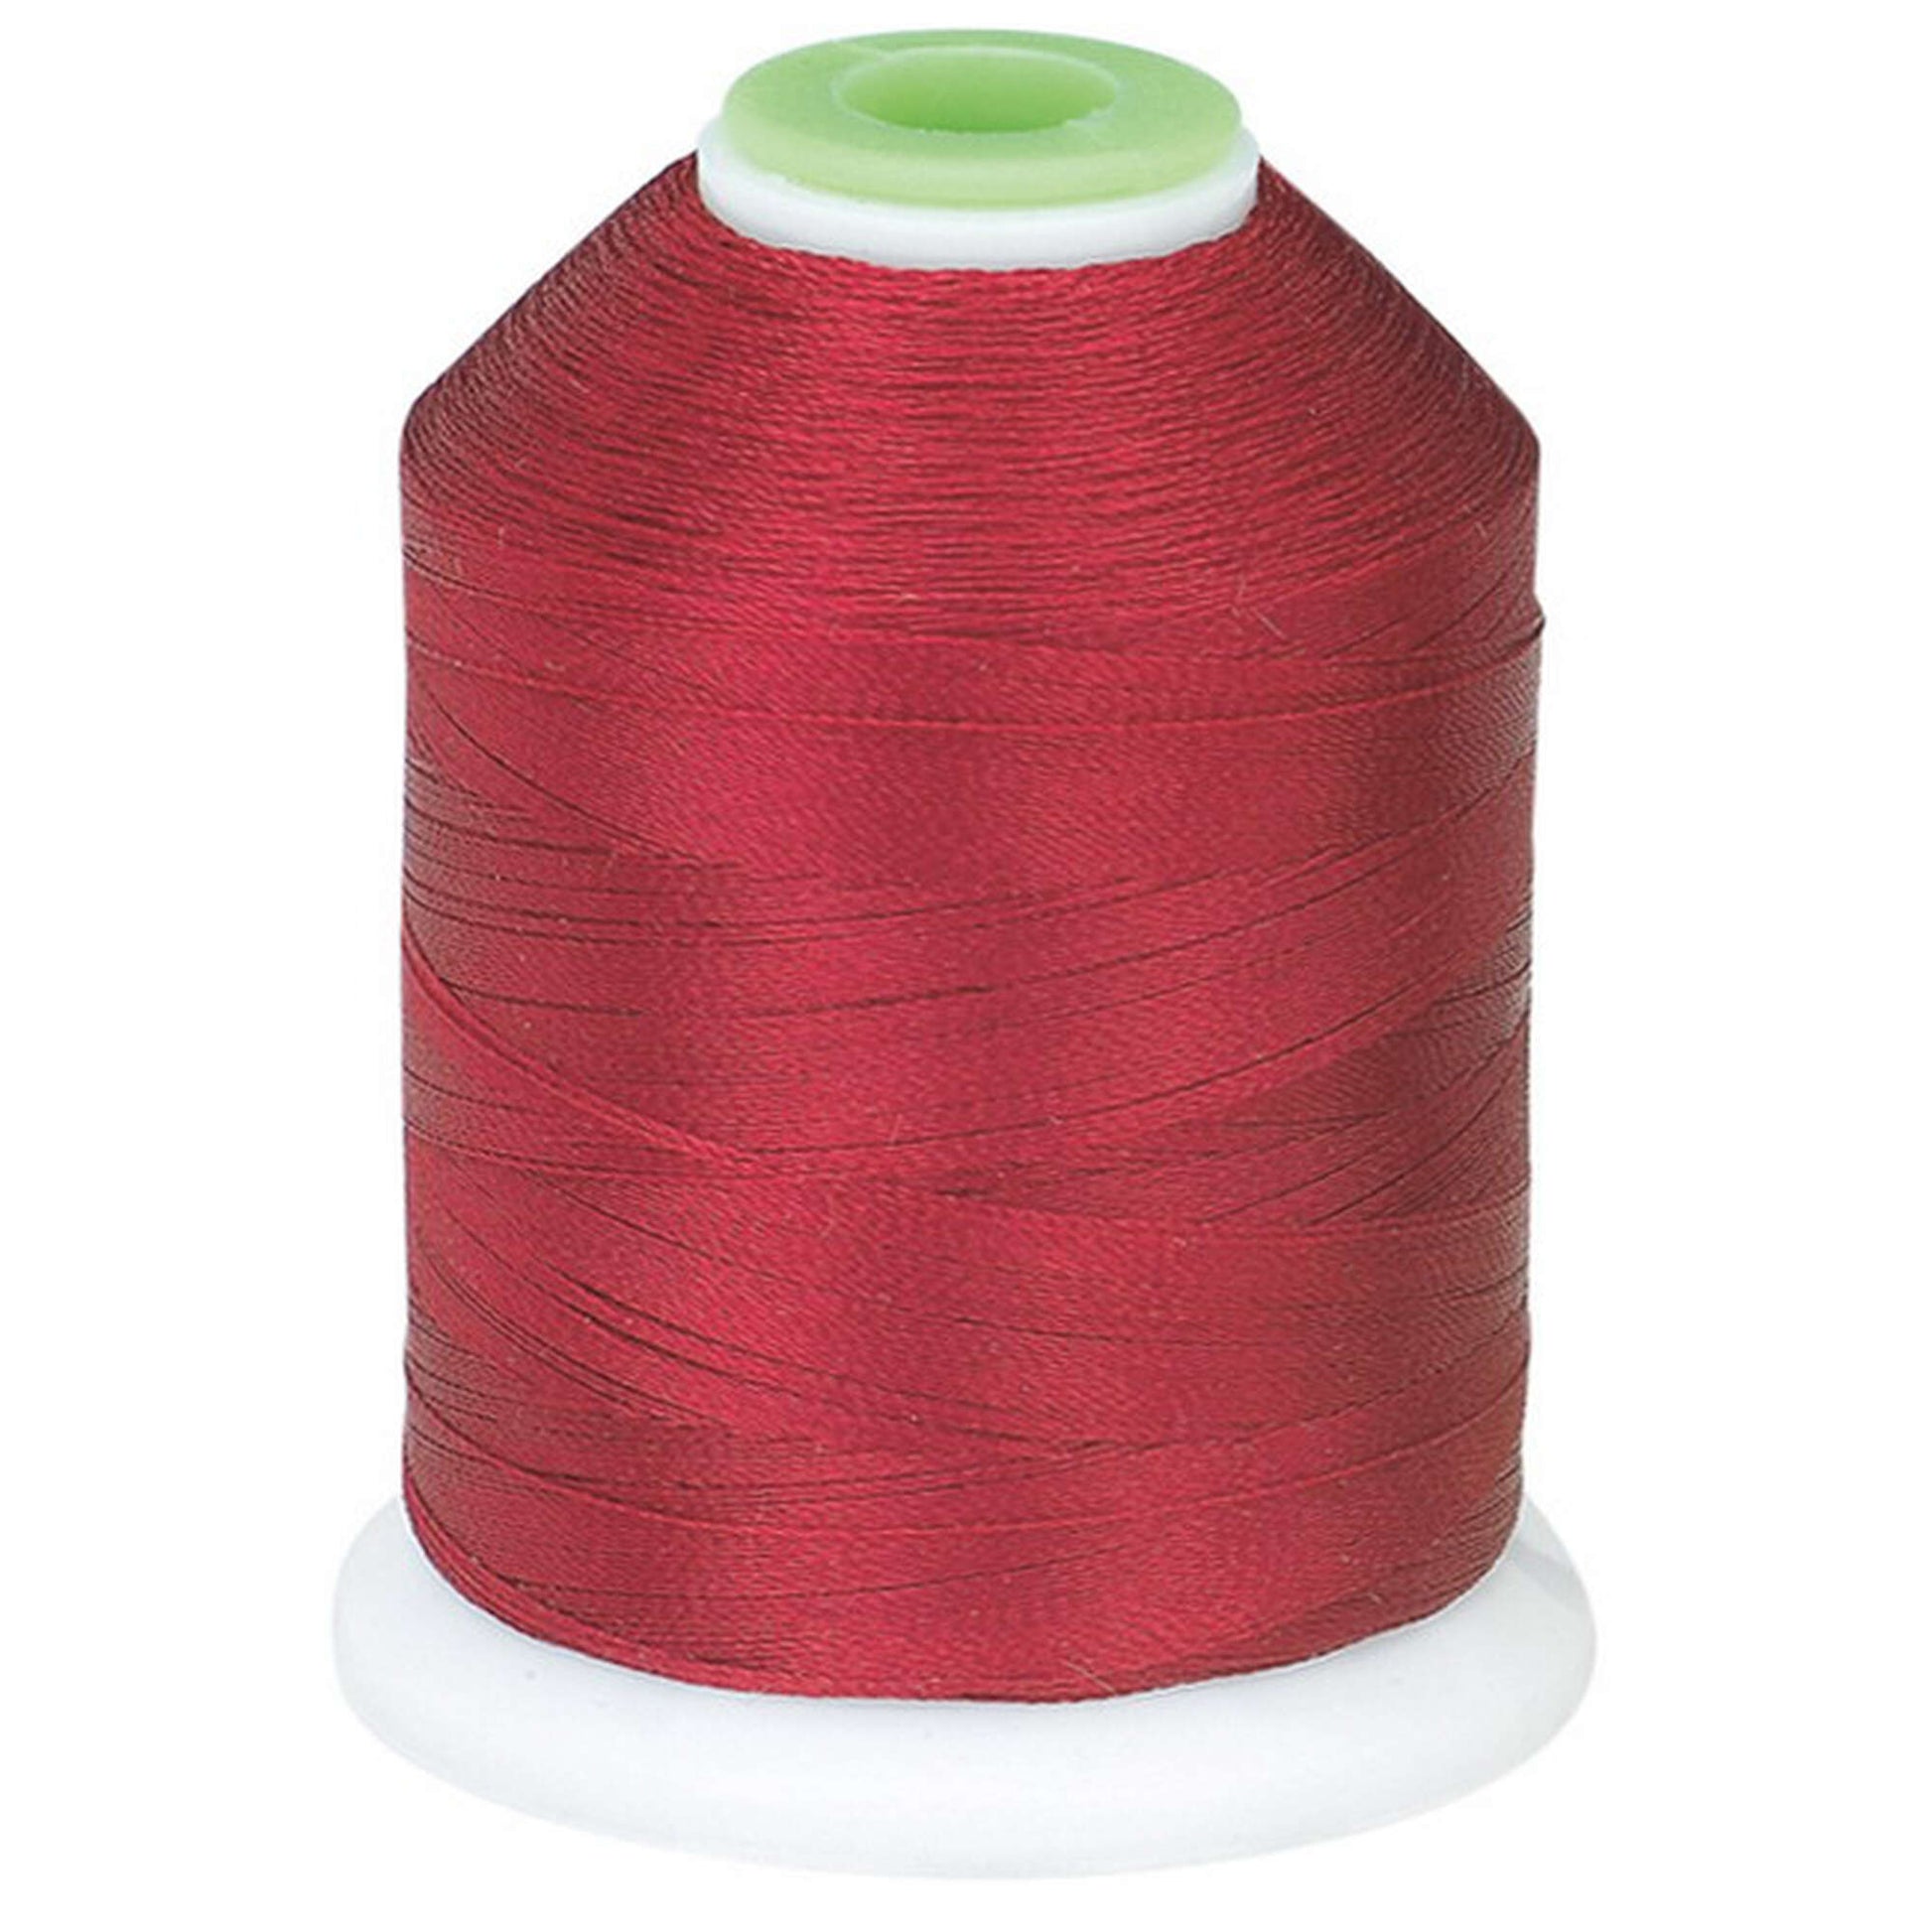 Coats & Clark Machine Embroidery Thread (1100 Yards) Barberry Red